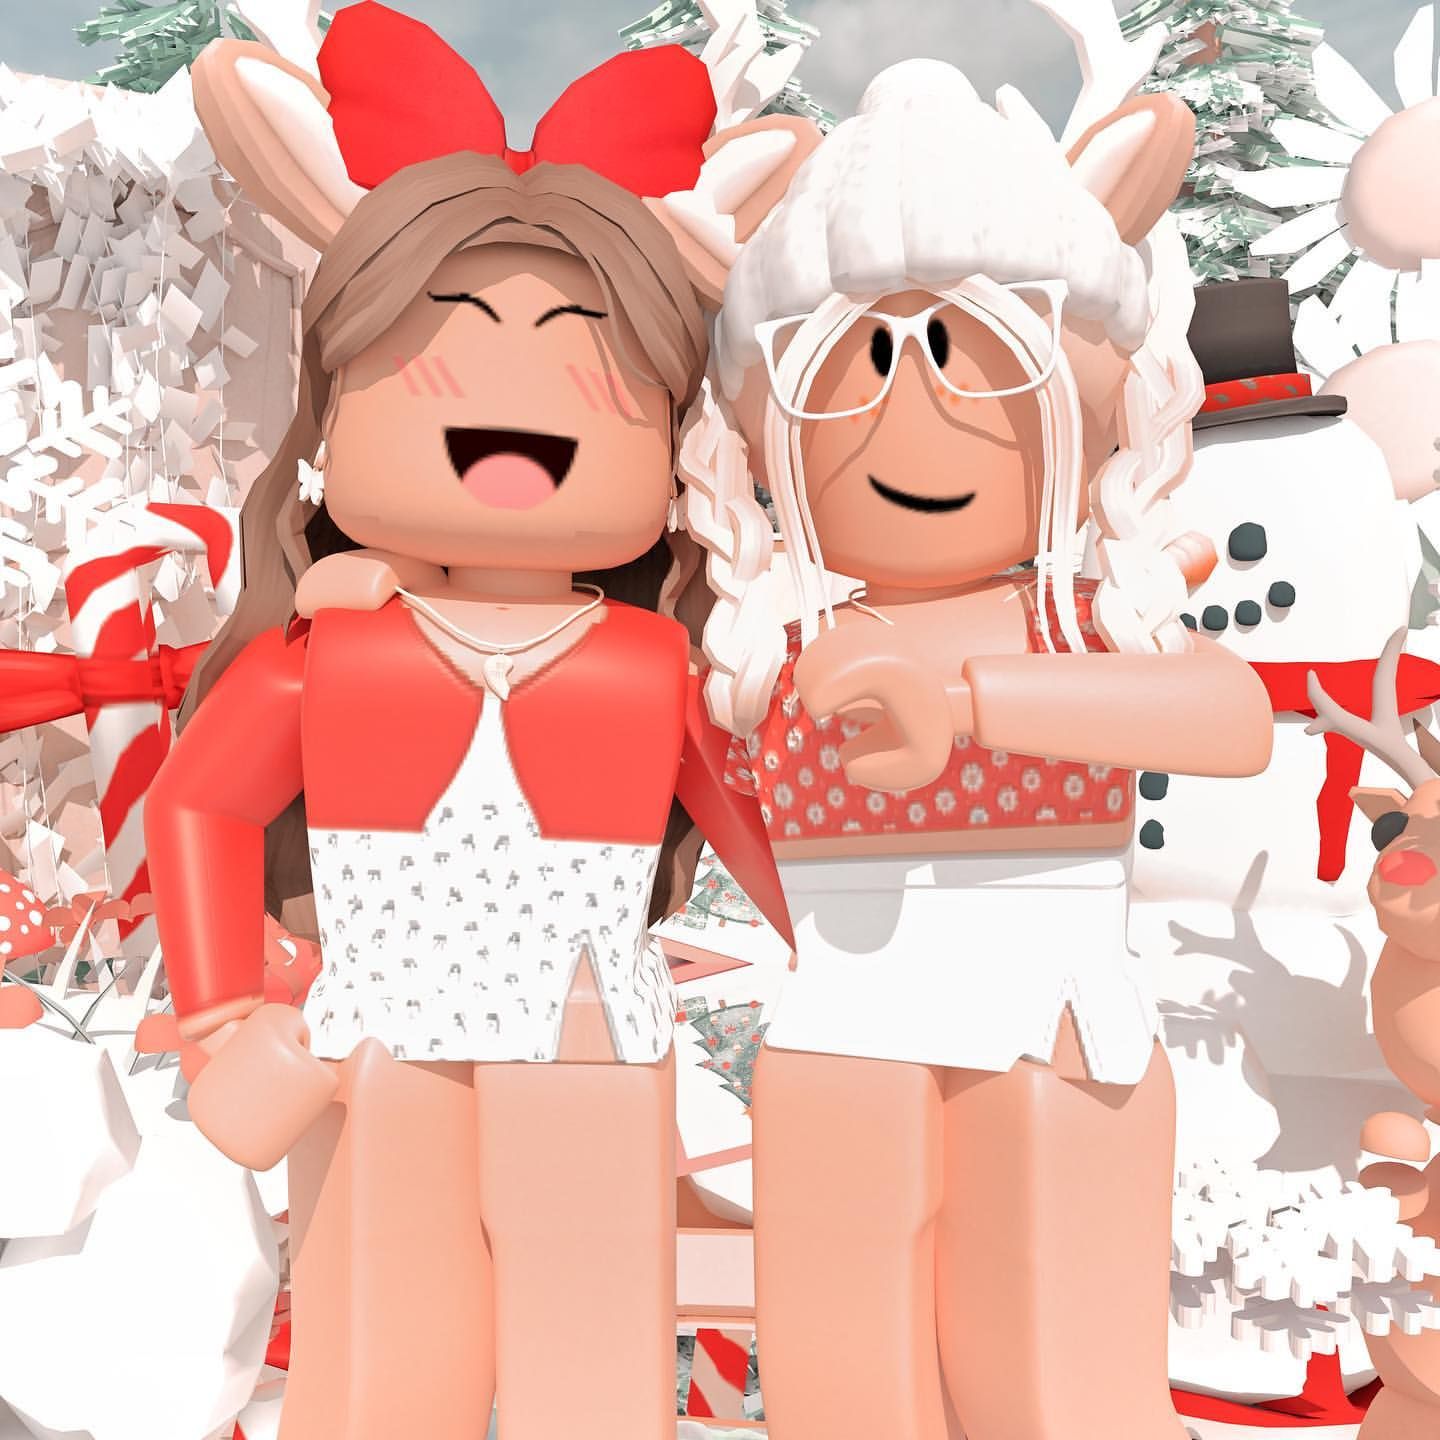 BFF Selfie. Roblox Christmas Selfie. Cute tumblr wallpaper, Roblox animation, Roblox picture